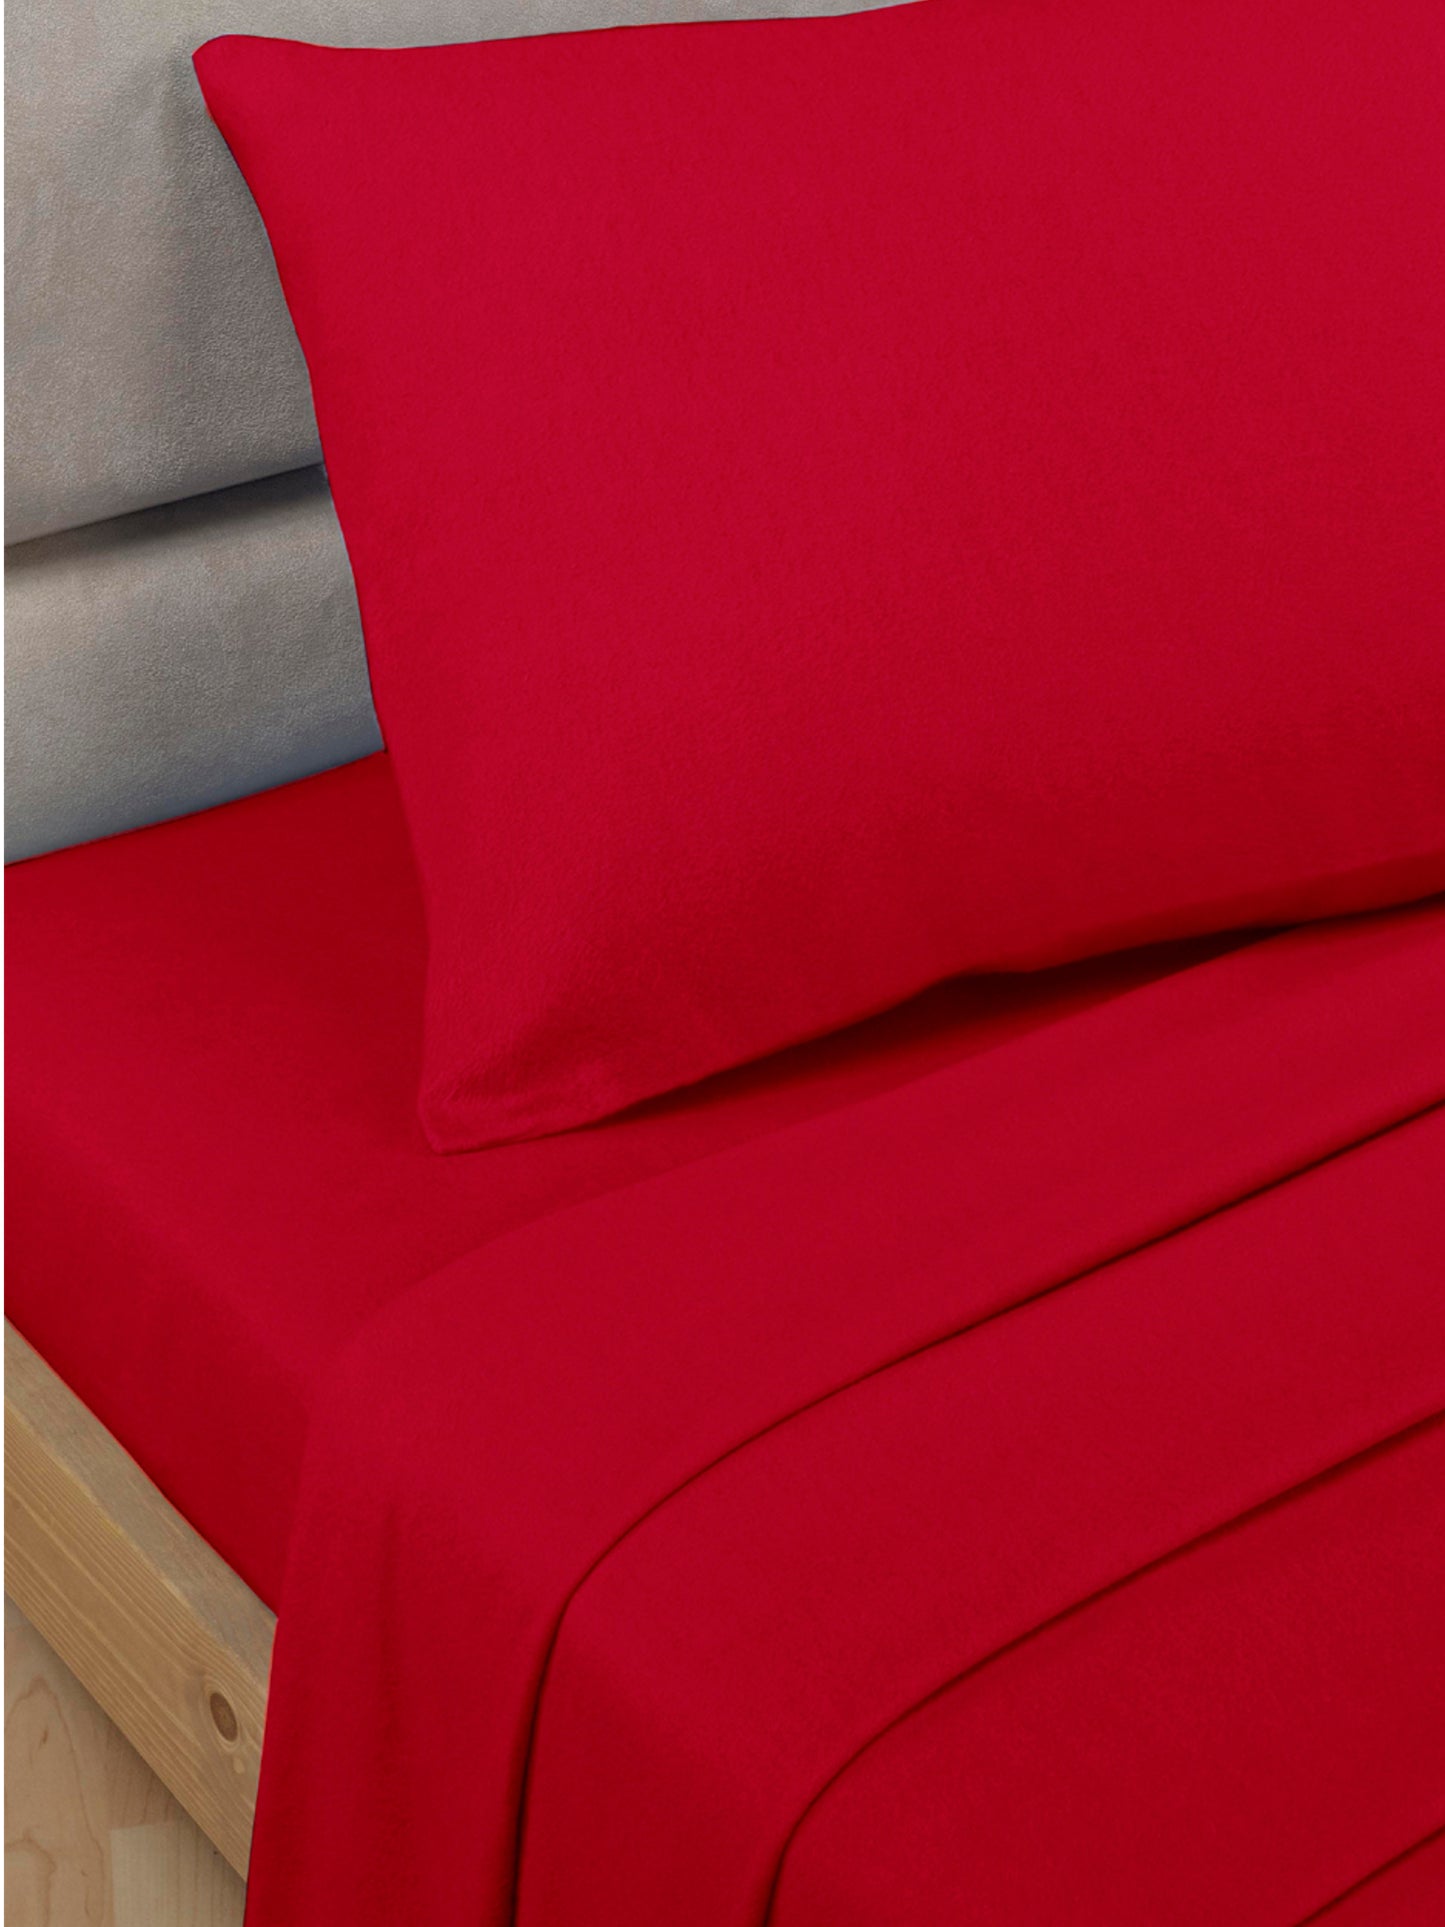 Percale Luxury Flat Sheet Red